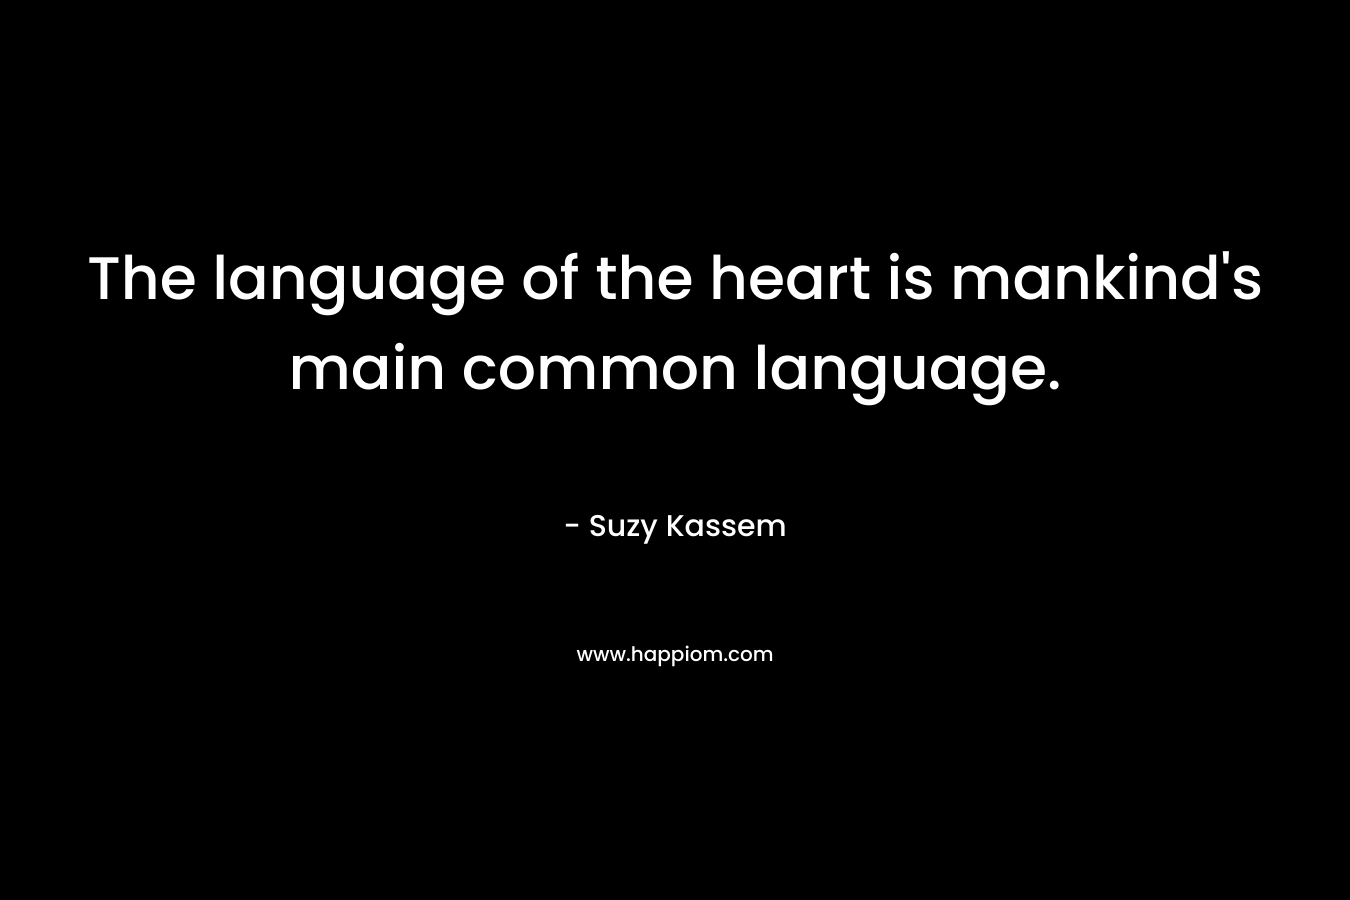 The language of the heart is mankind's main common language.